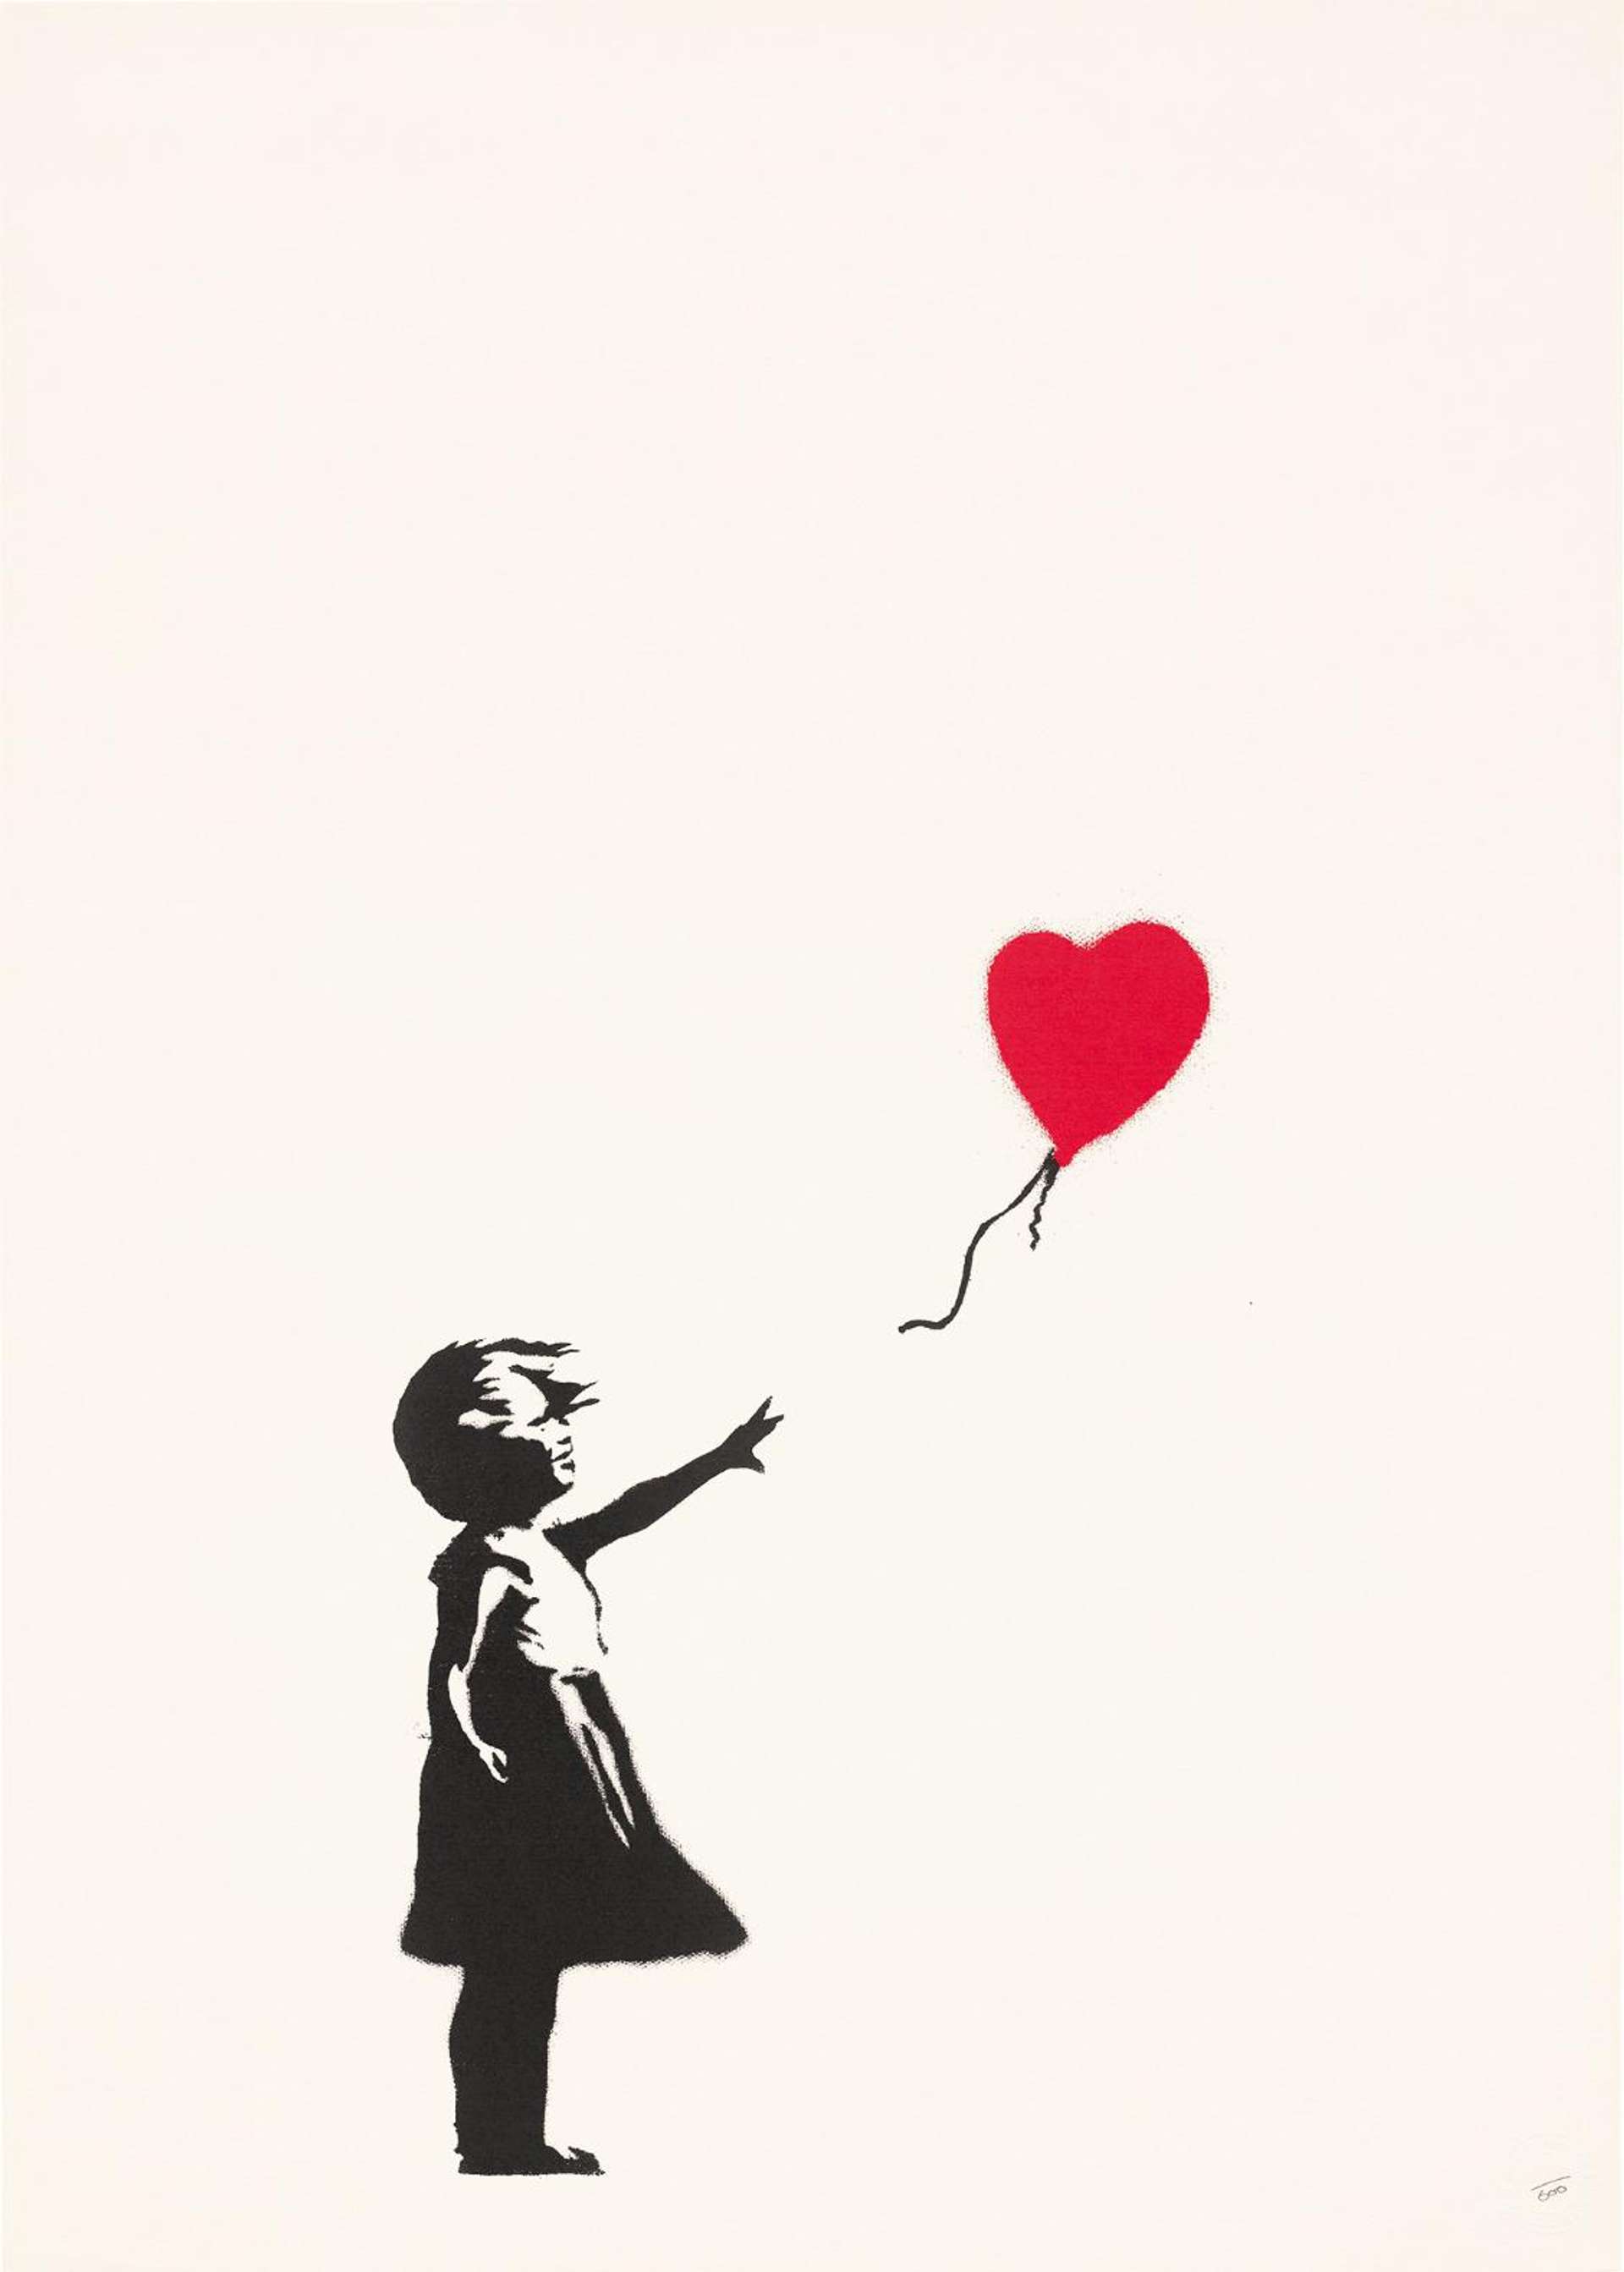 A screenprint by Banksy depicting a young girl reaching for a red heart-shaped balloon against a white background.